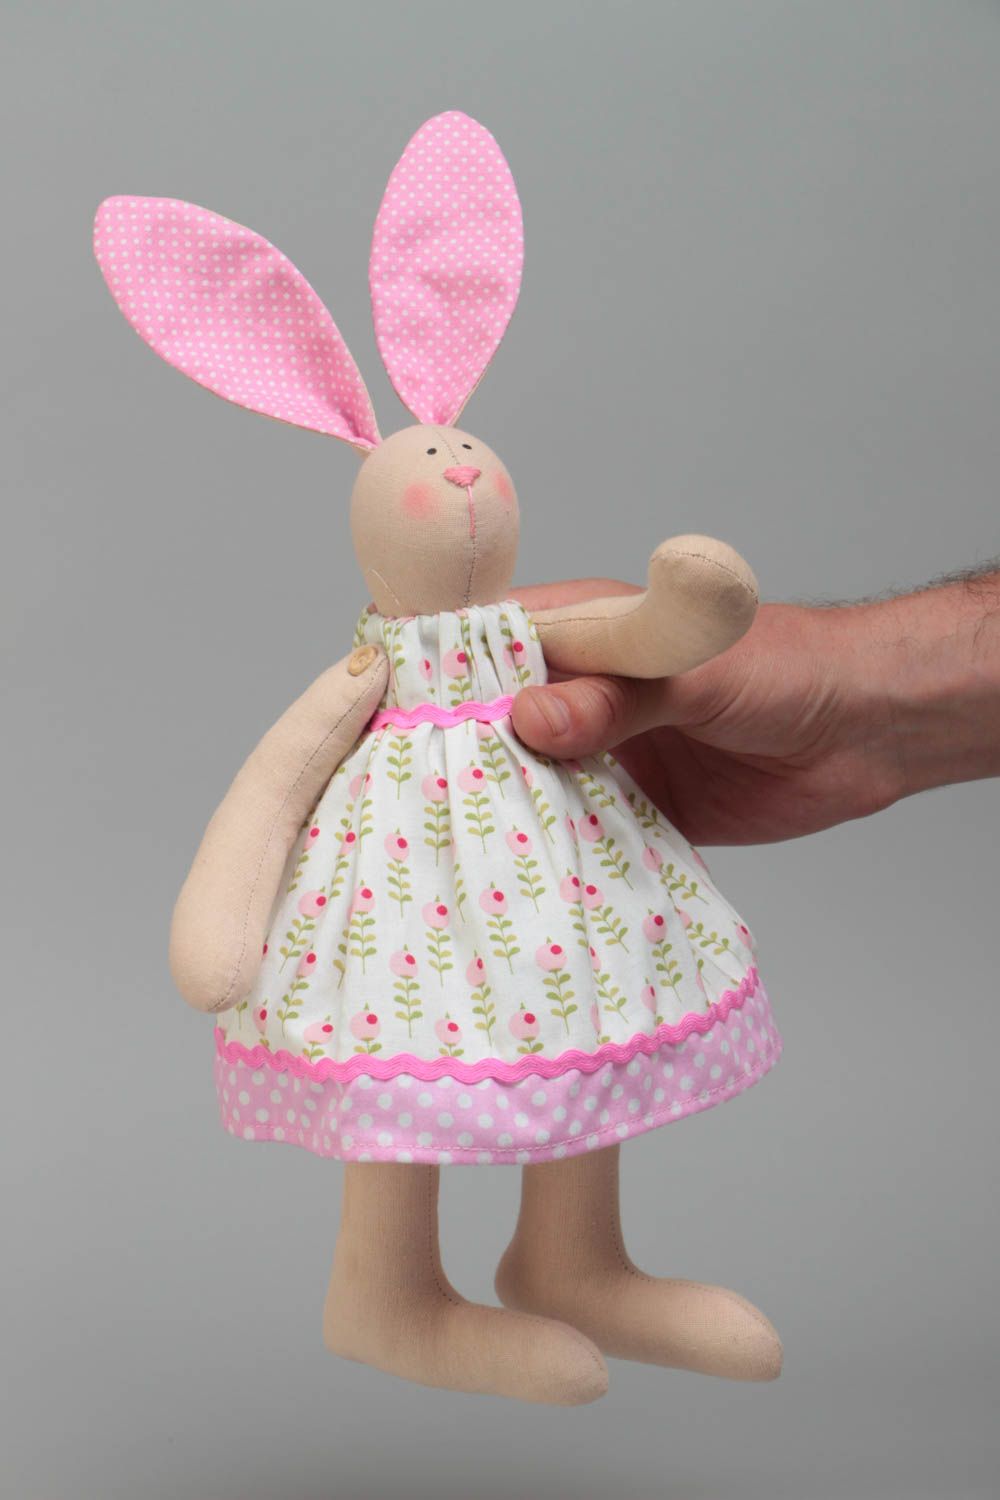 Handmade cotton fabric soft toy rabbit in floral dress with pink polka dot ears photo 5